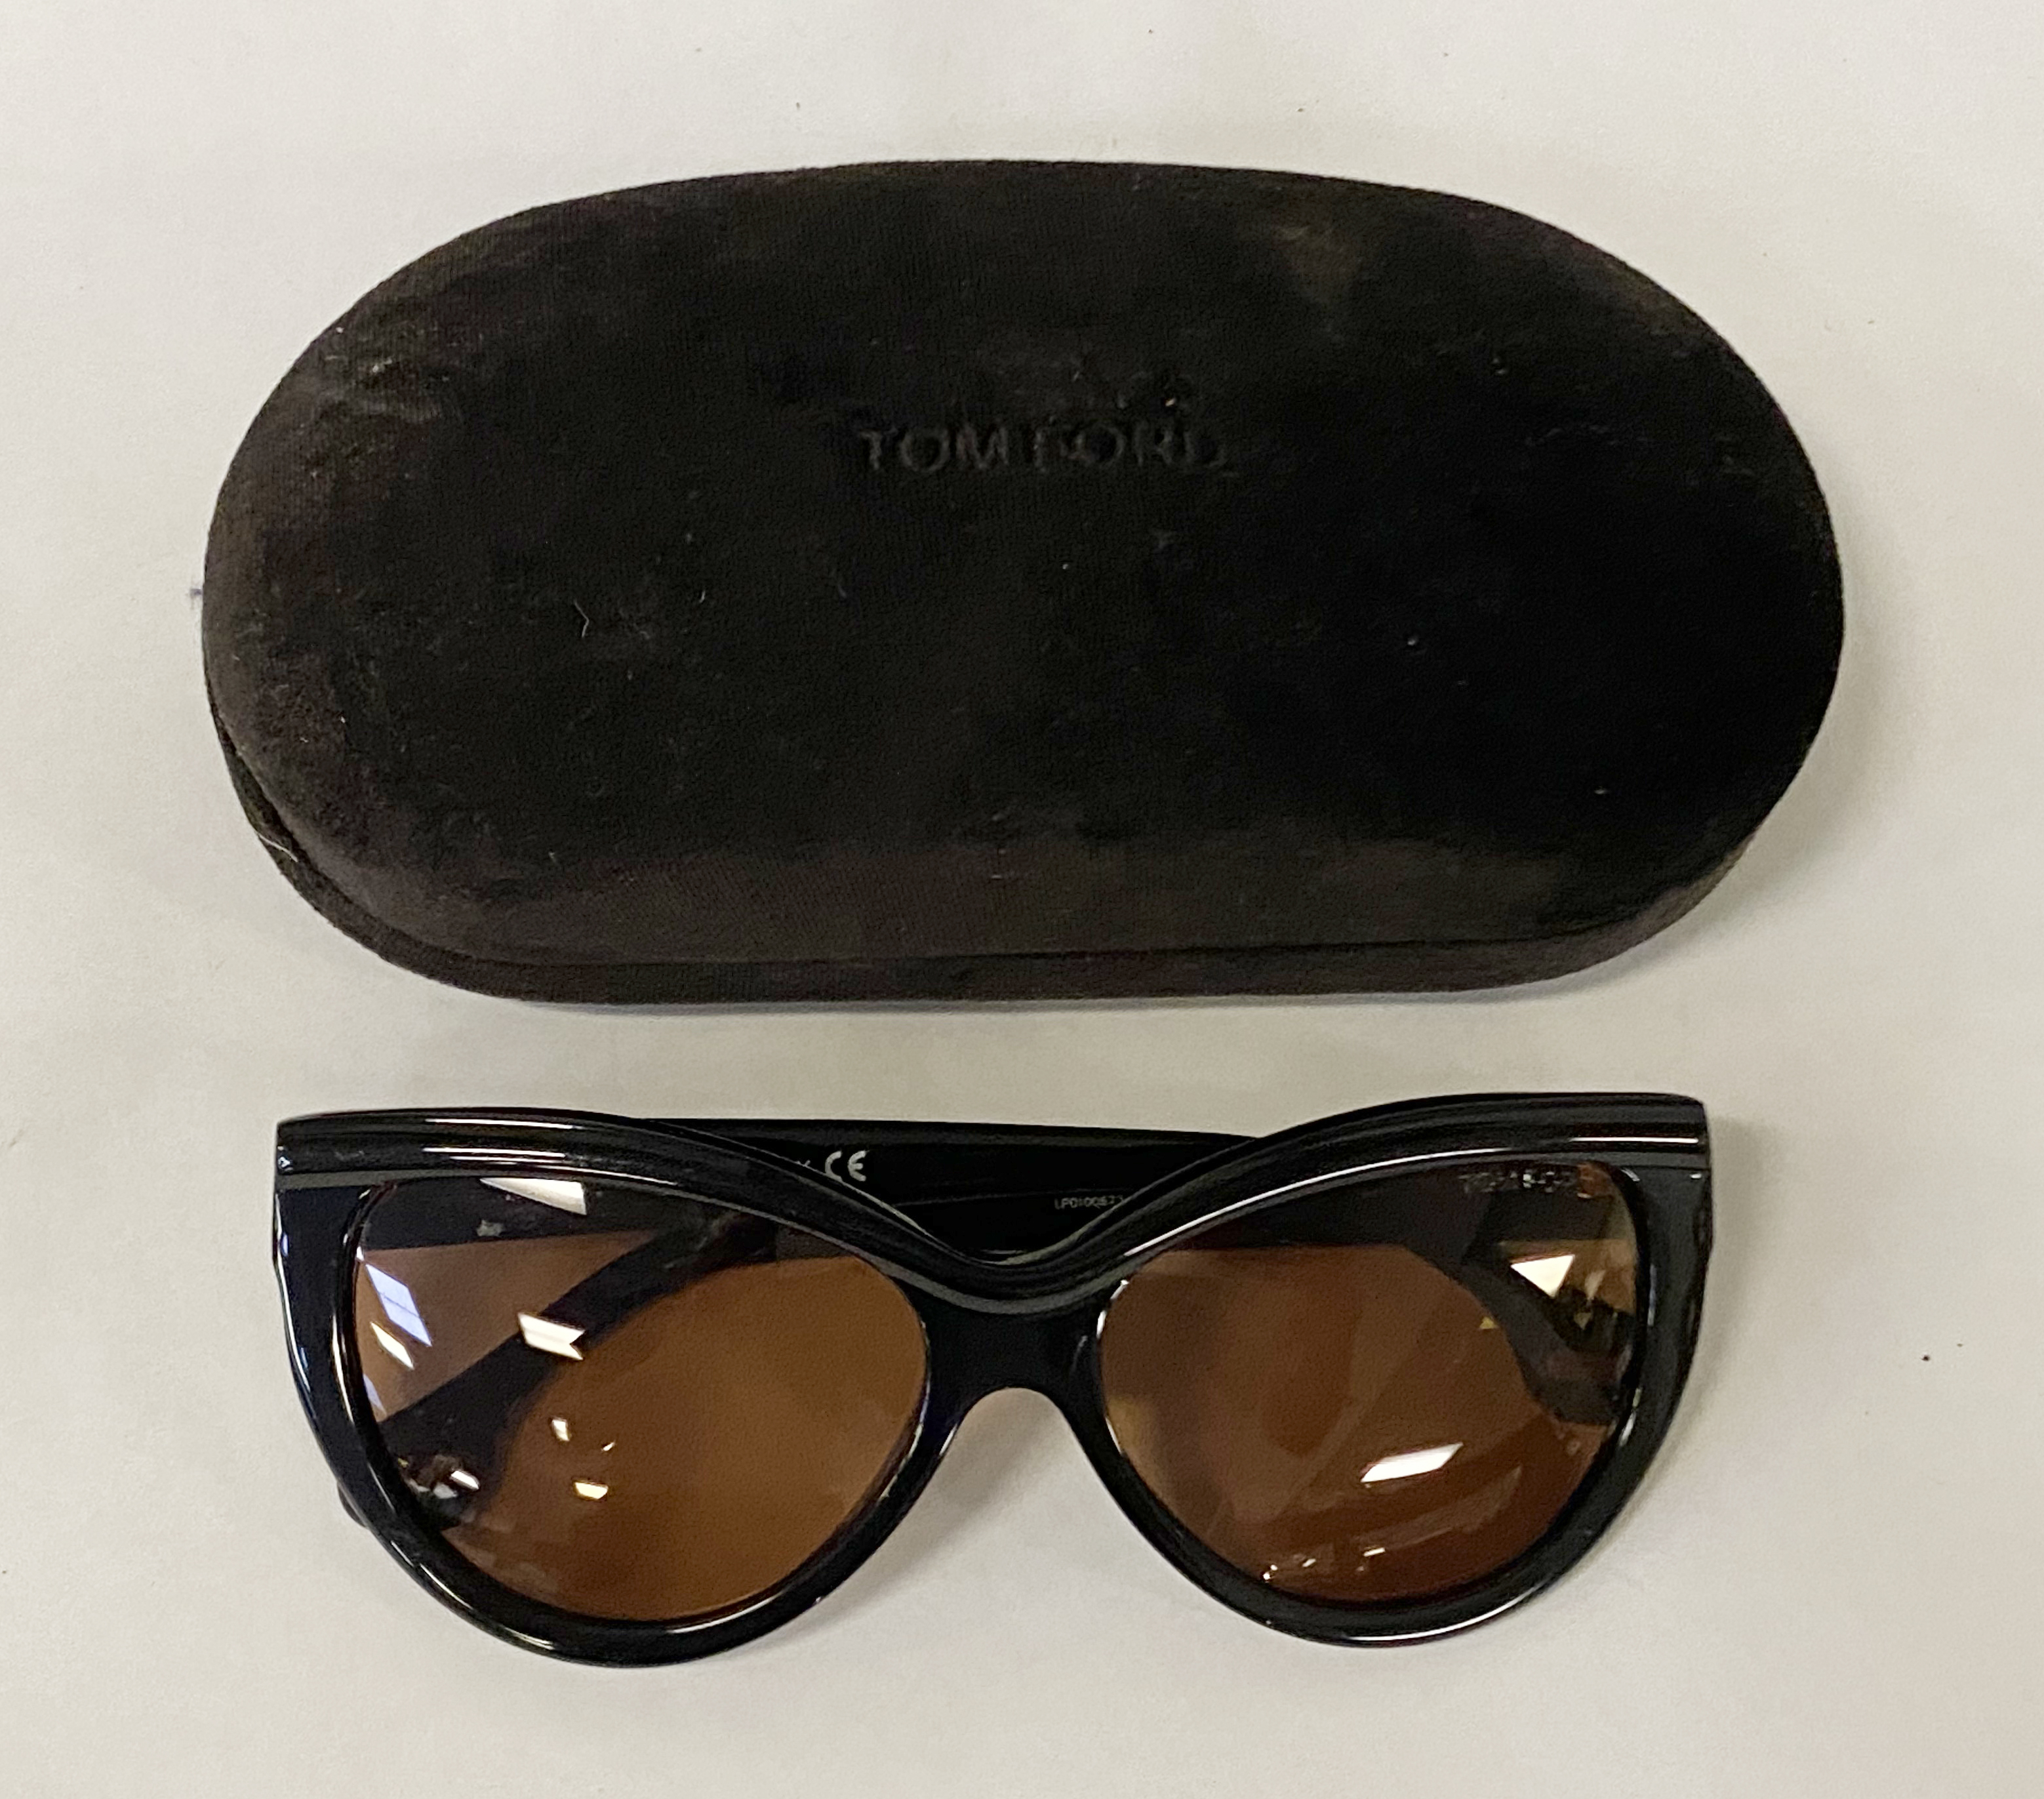 TOM FORD SUNGLASSES - IN CASE